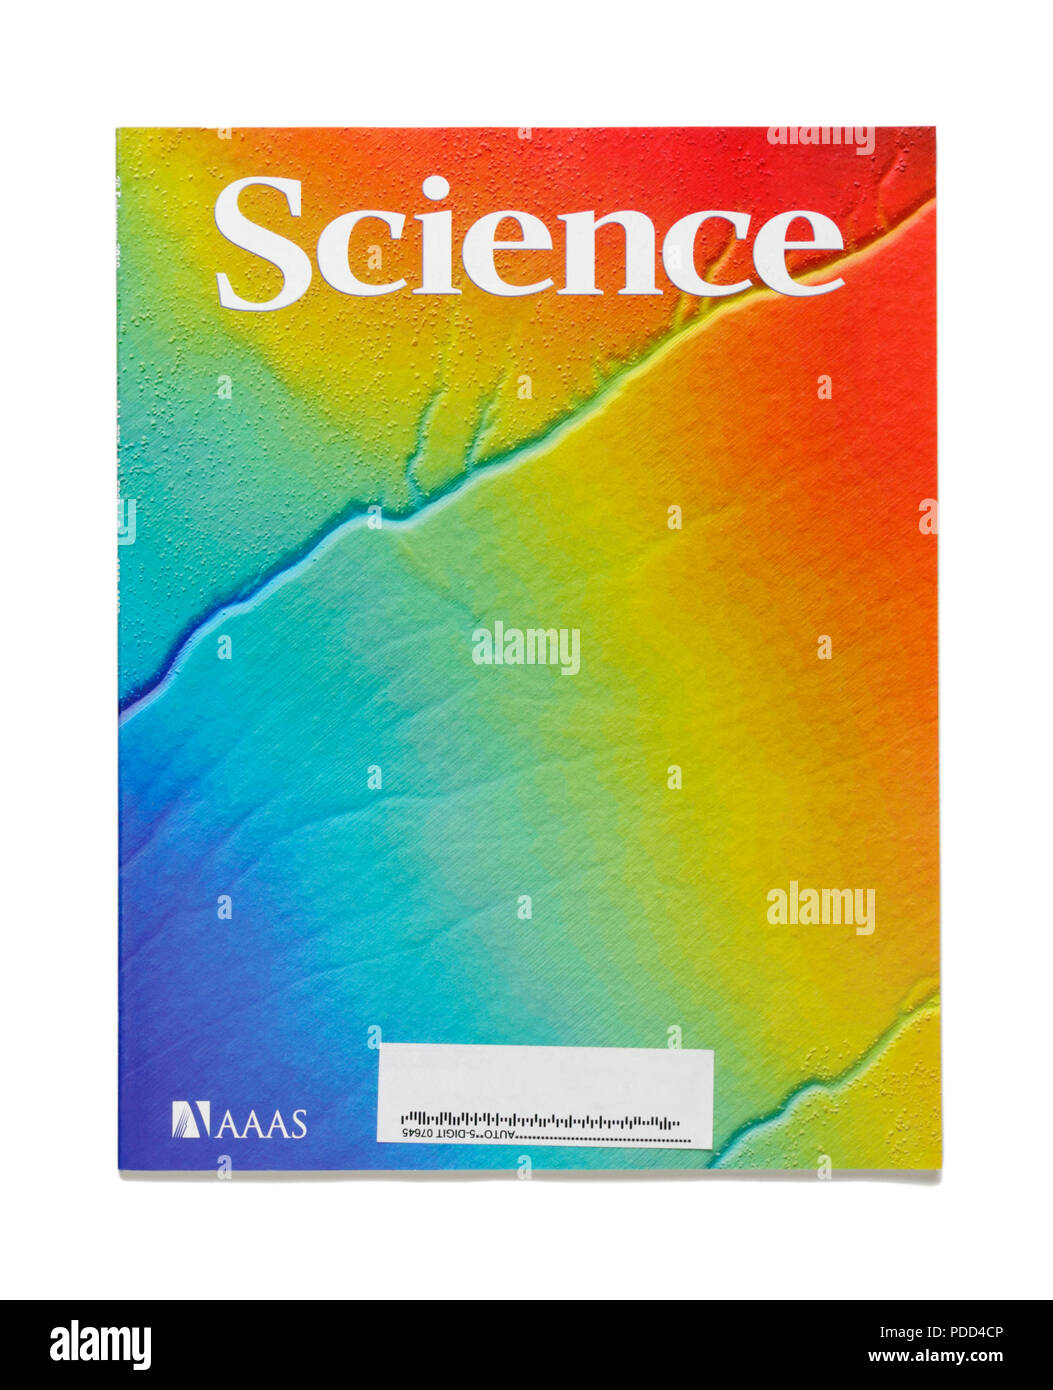 Peer reviewed science research journals.  This journal, Science, is published by the American Association for the Advancement of Science (AAAS). Stock Photo